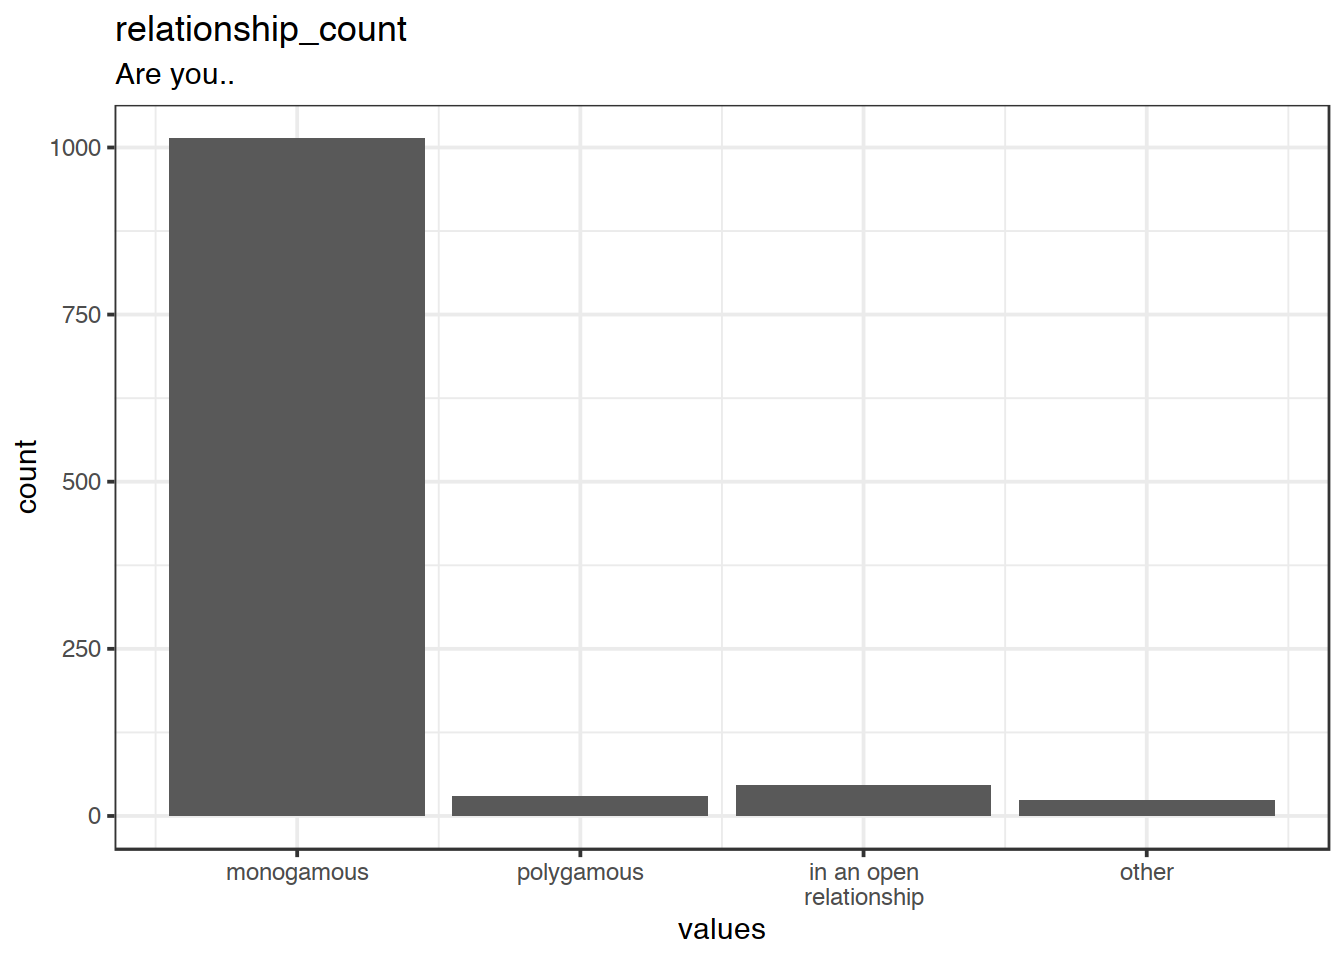 Distribution of values for relationship_count